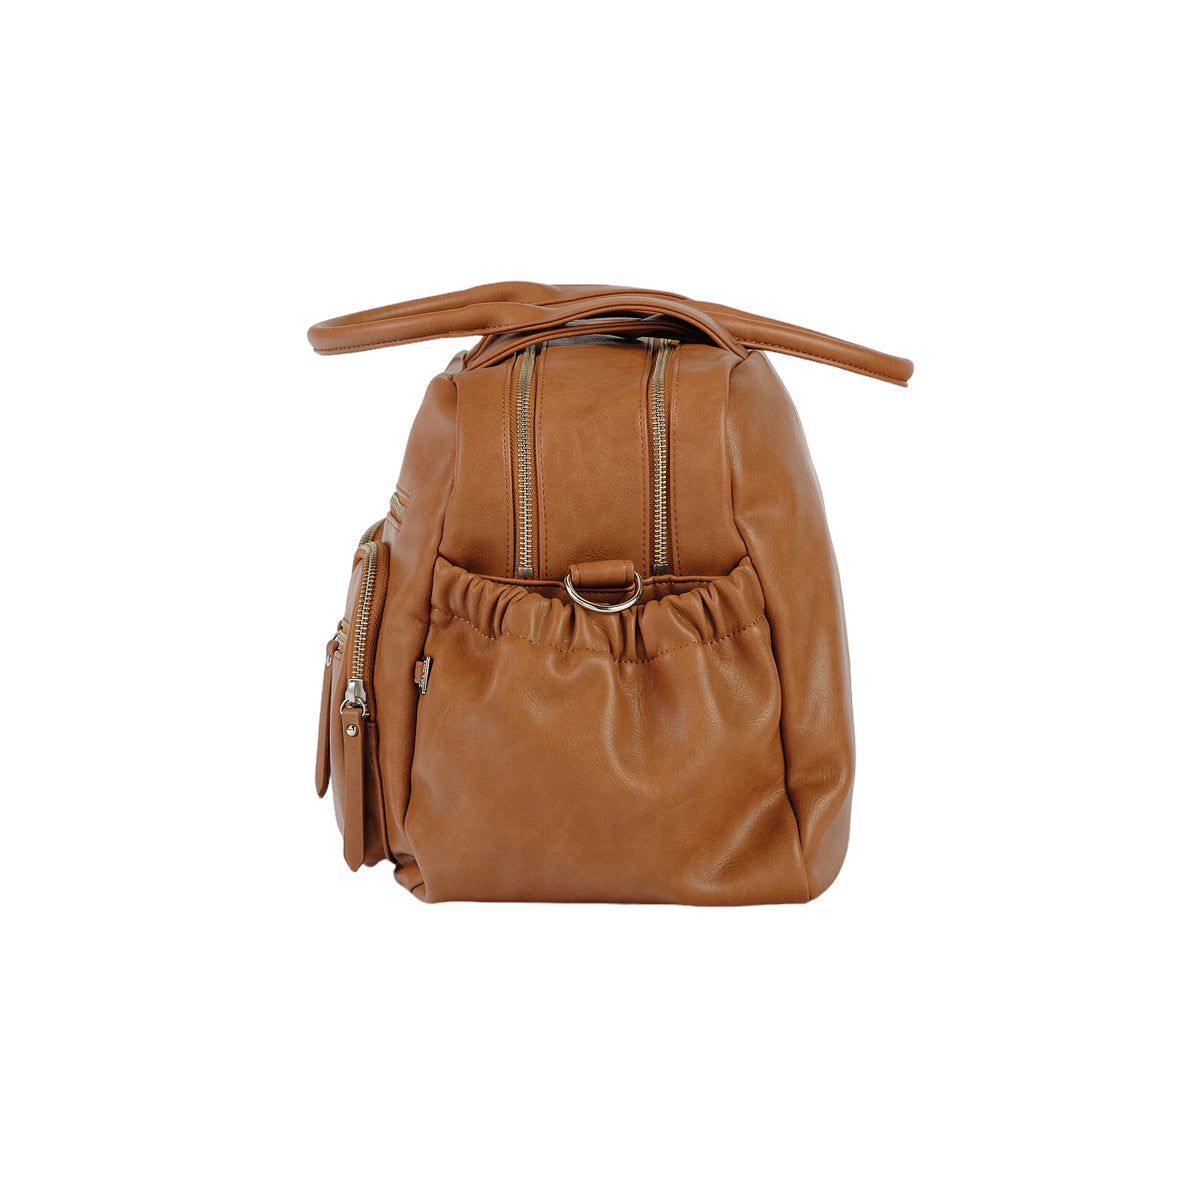 OiOi Vegan Leather Carry All Nappy Bag - Tan